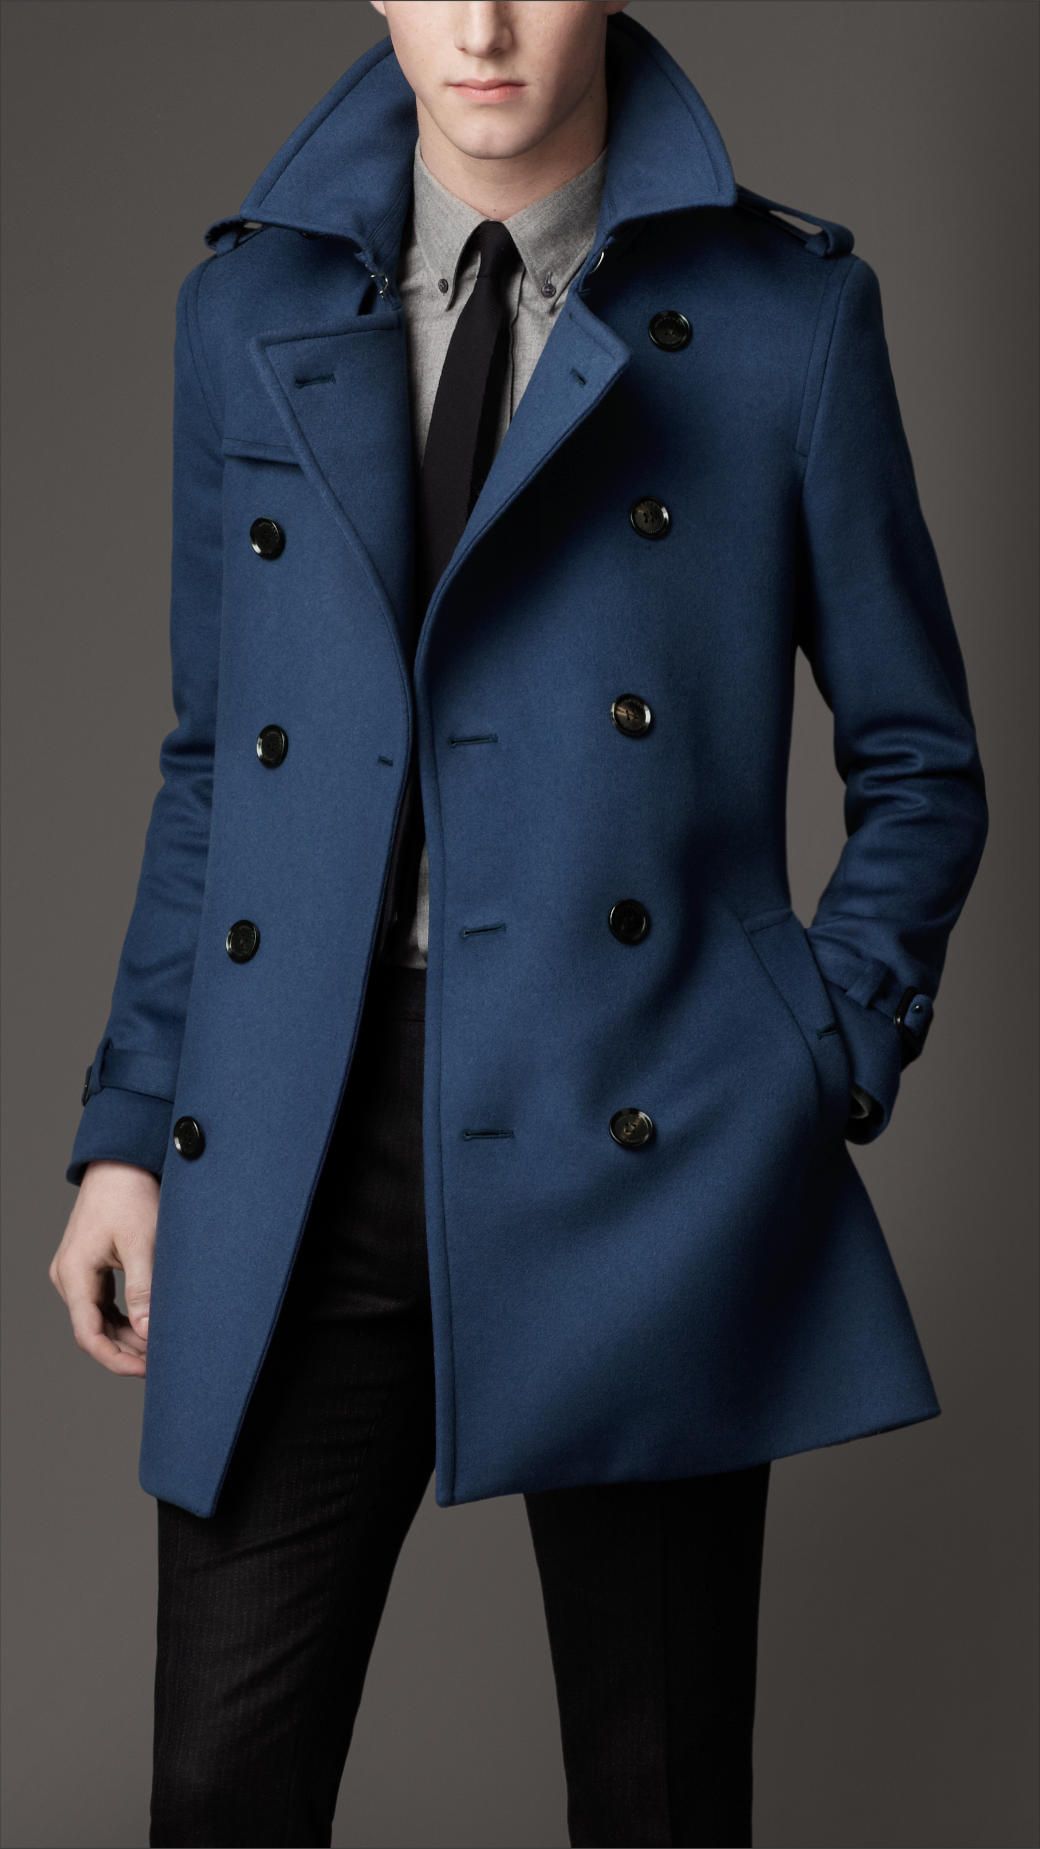 By Burberry #coat